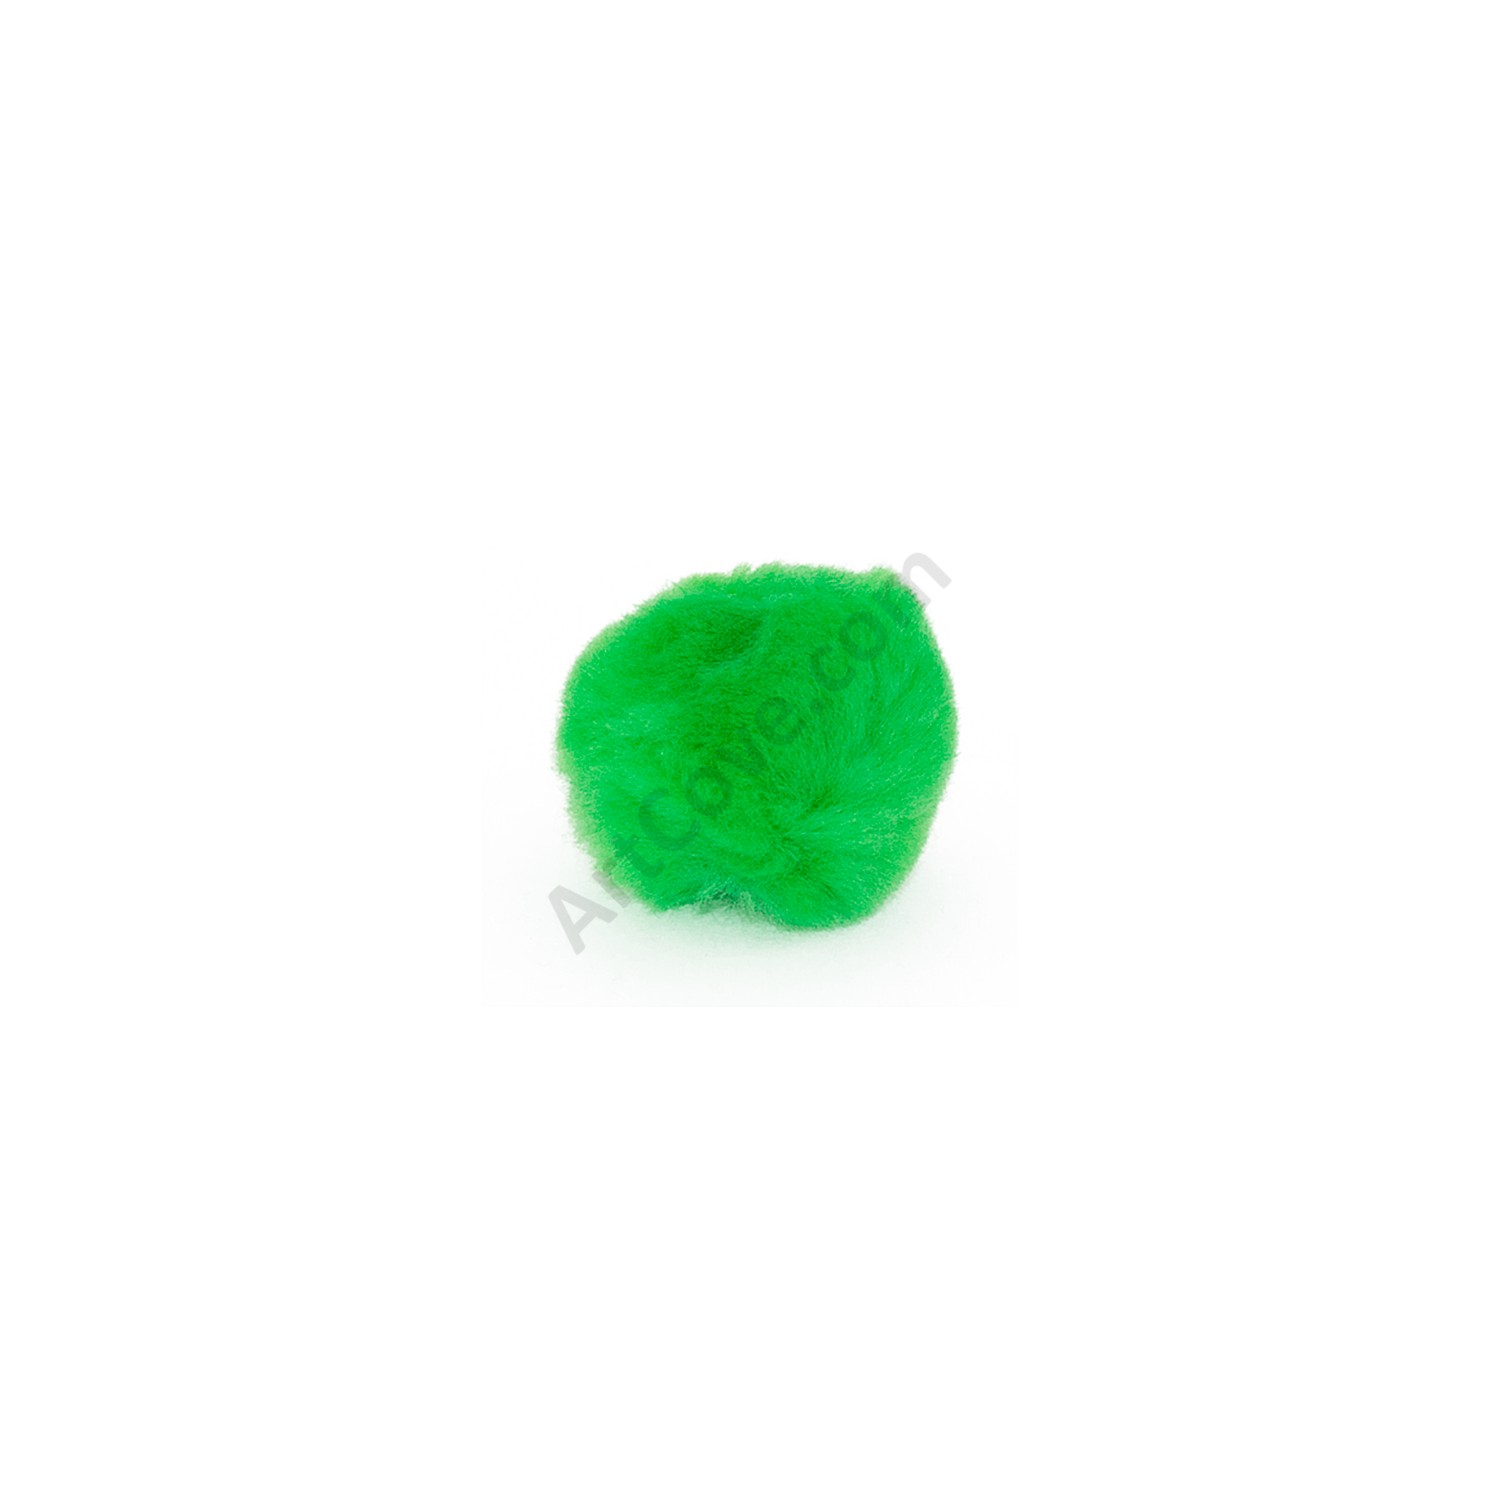 Green Pom Poms by Creatology™, 80ct.